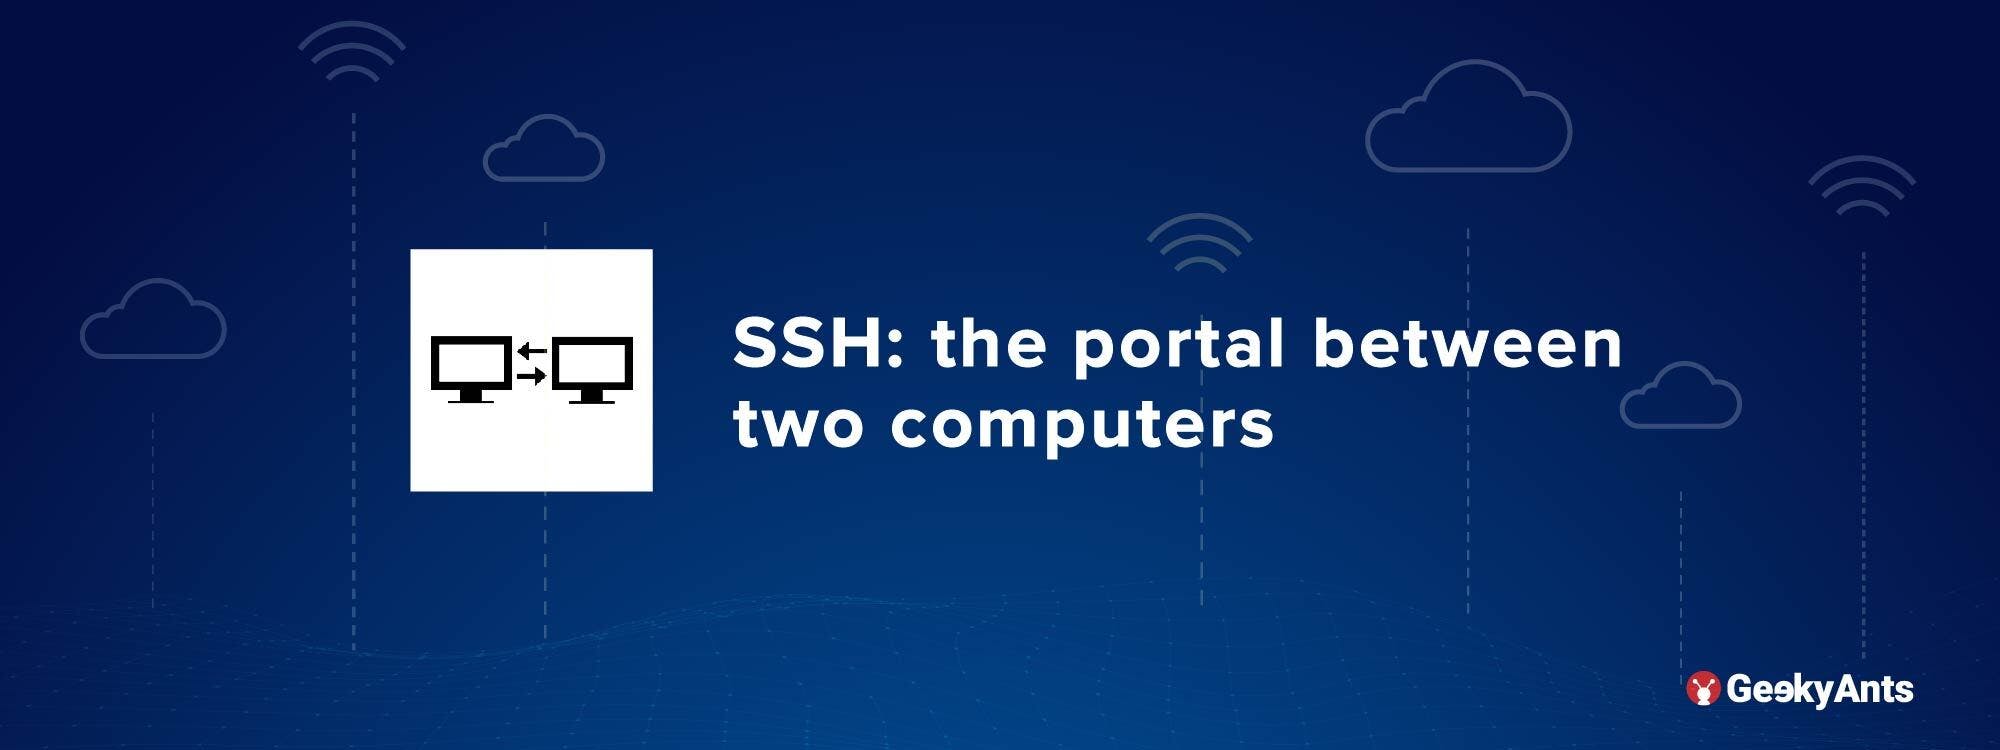 SSH: The Portal Between Two Computers